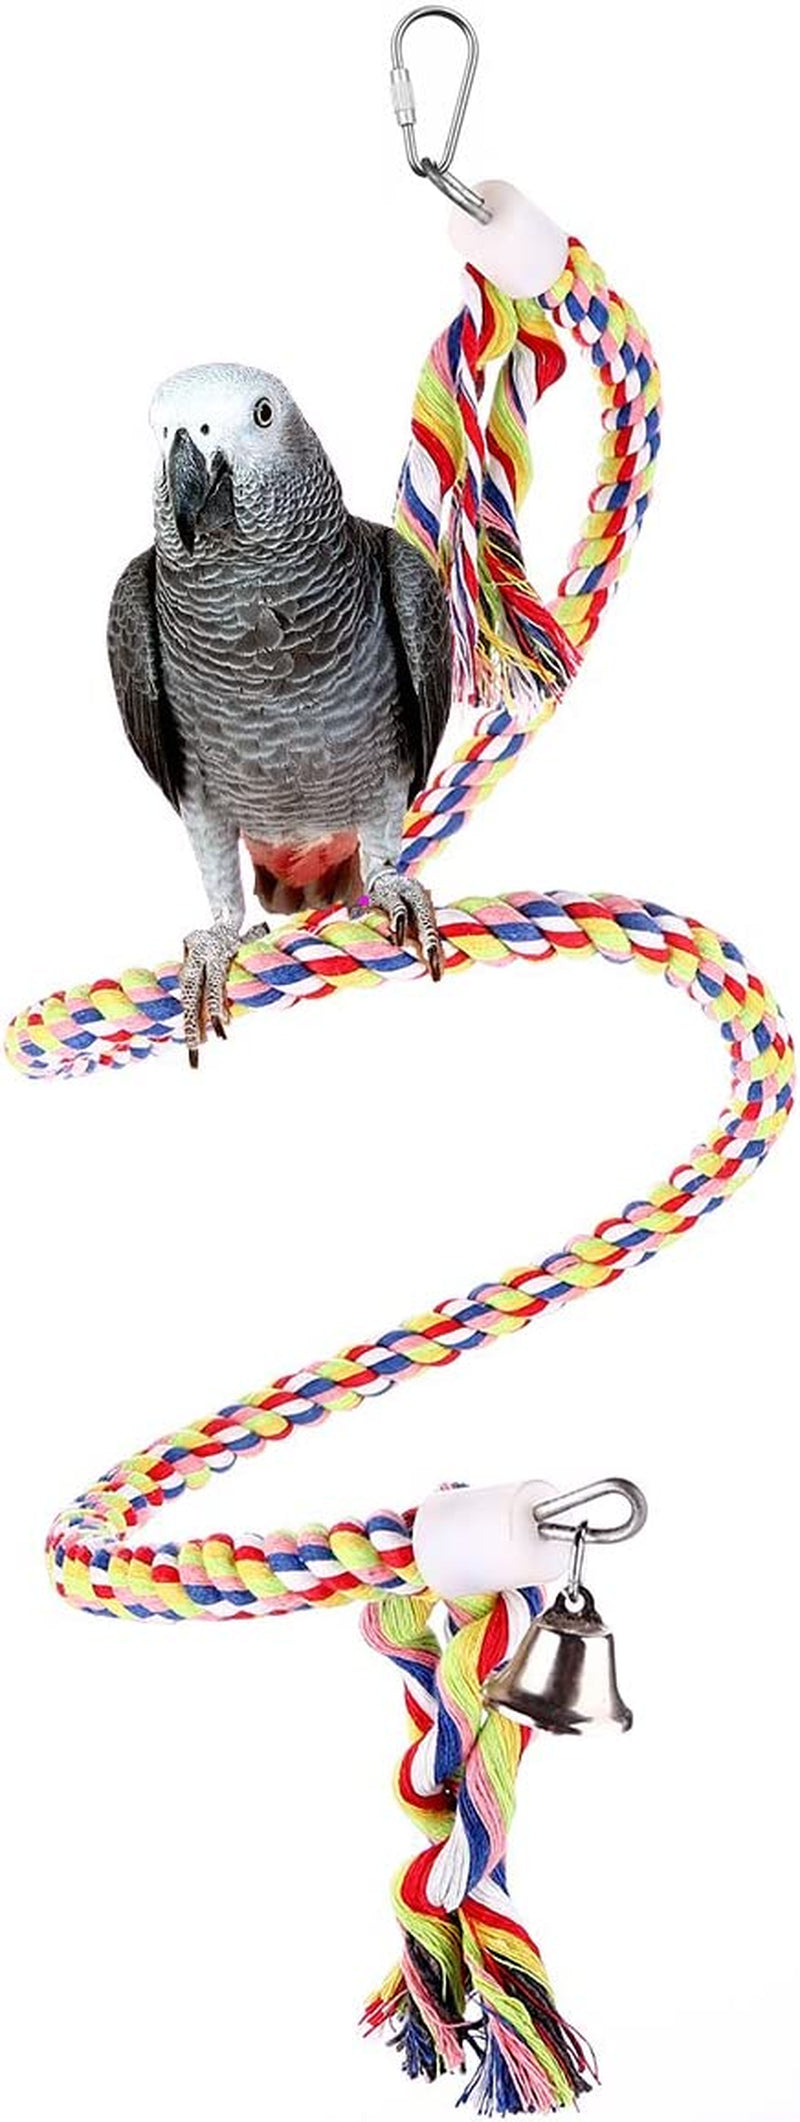 Bvanki Bird Rope Toys,49 Inch Long Parrot Bungees Rope Toys, Large Medium and Small Parrot Toys Spiral Standing Toys (Medium 49 Inch)